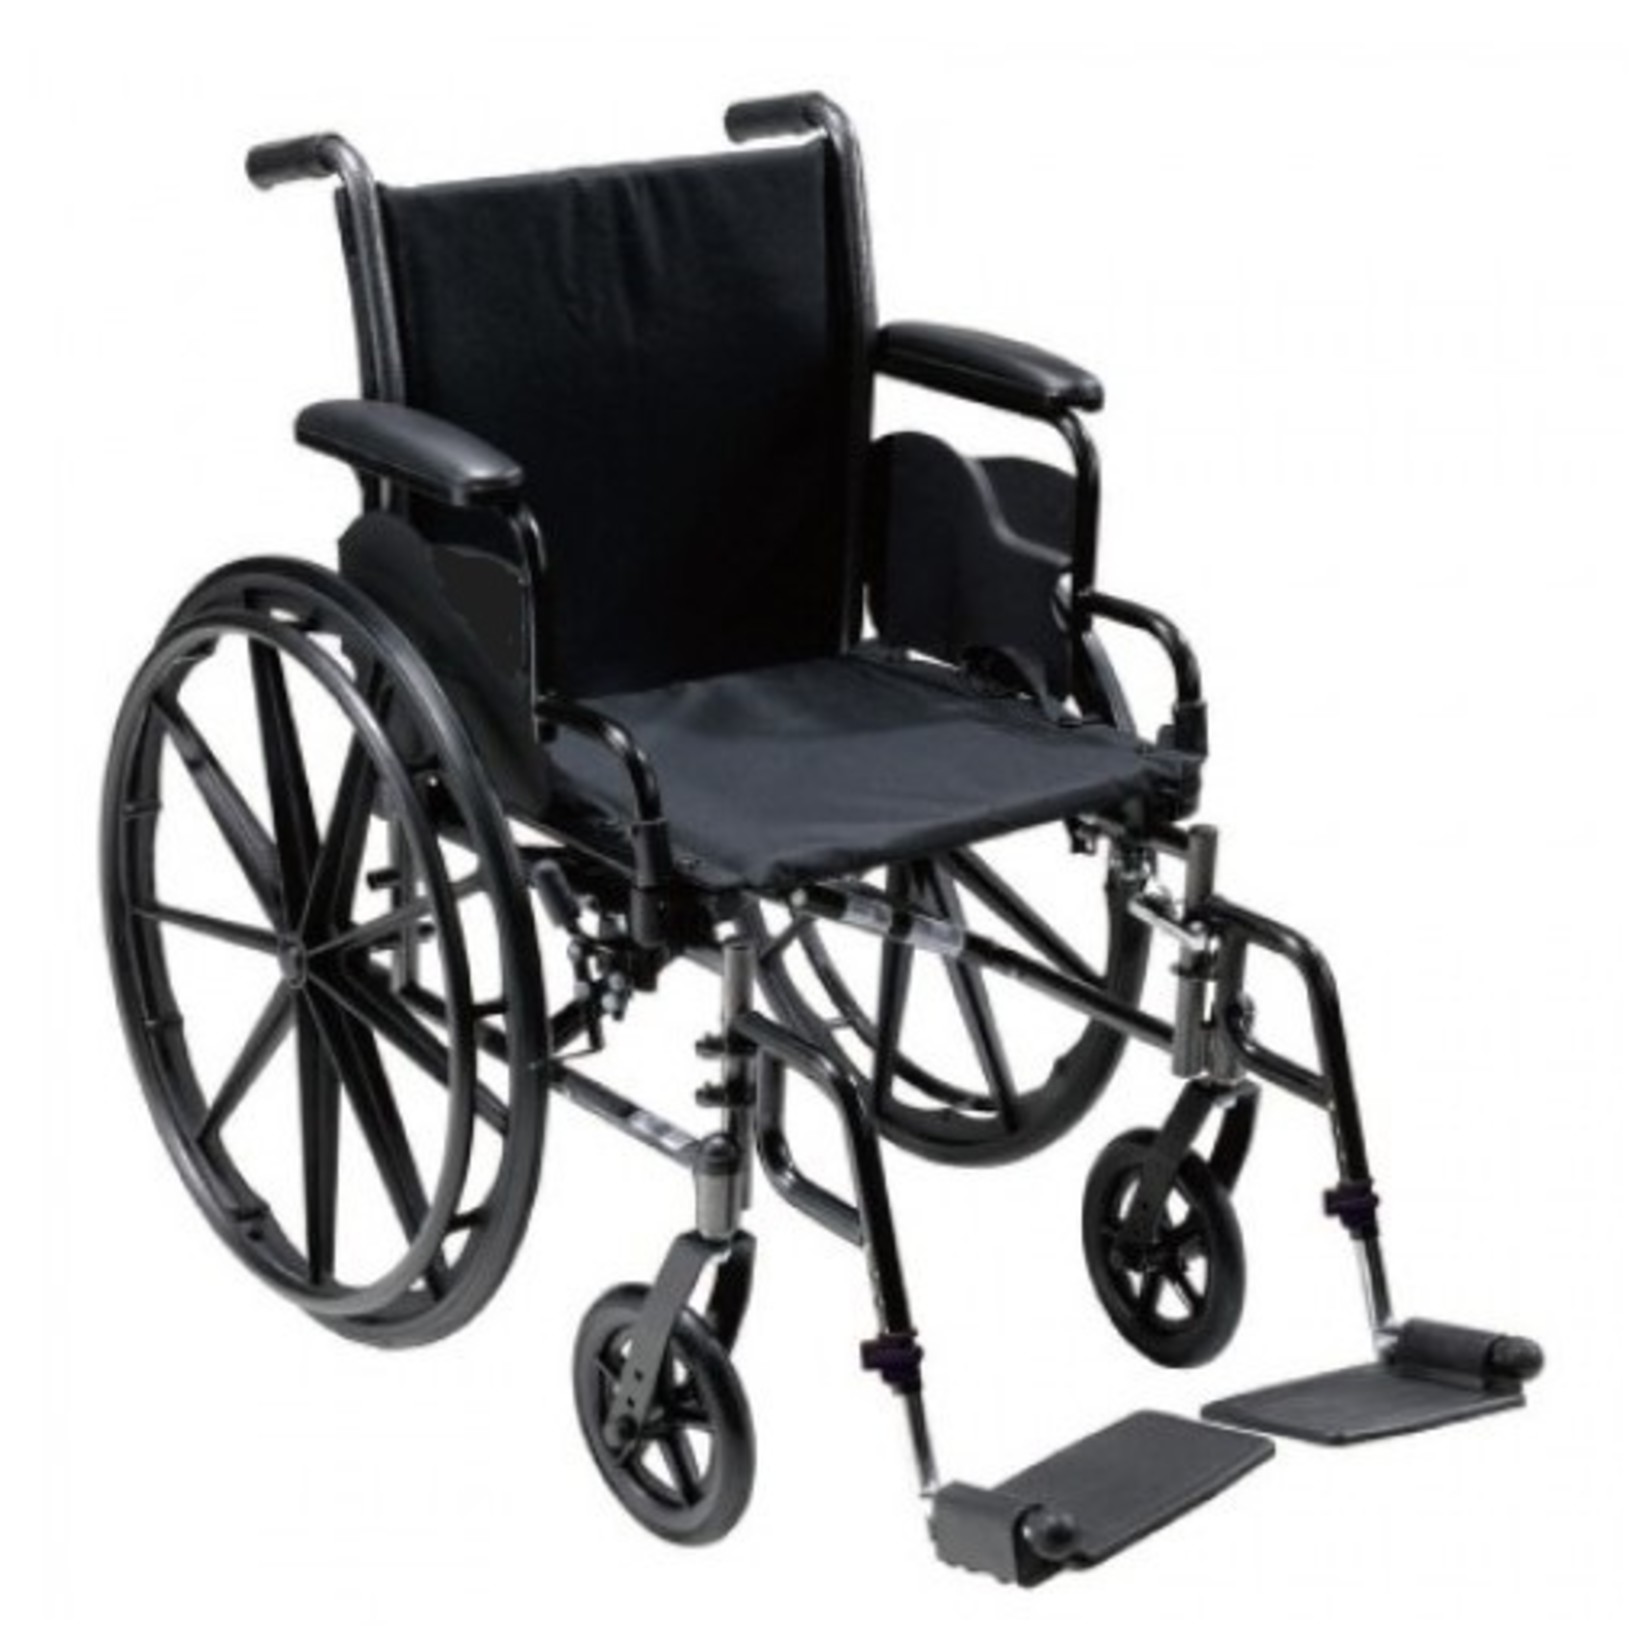 MOBB Wheelchair - Lightweight with desk arms